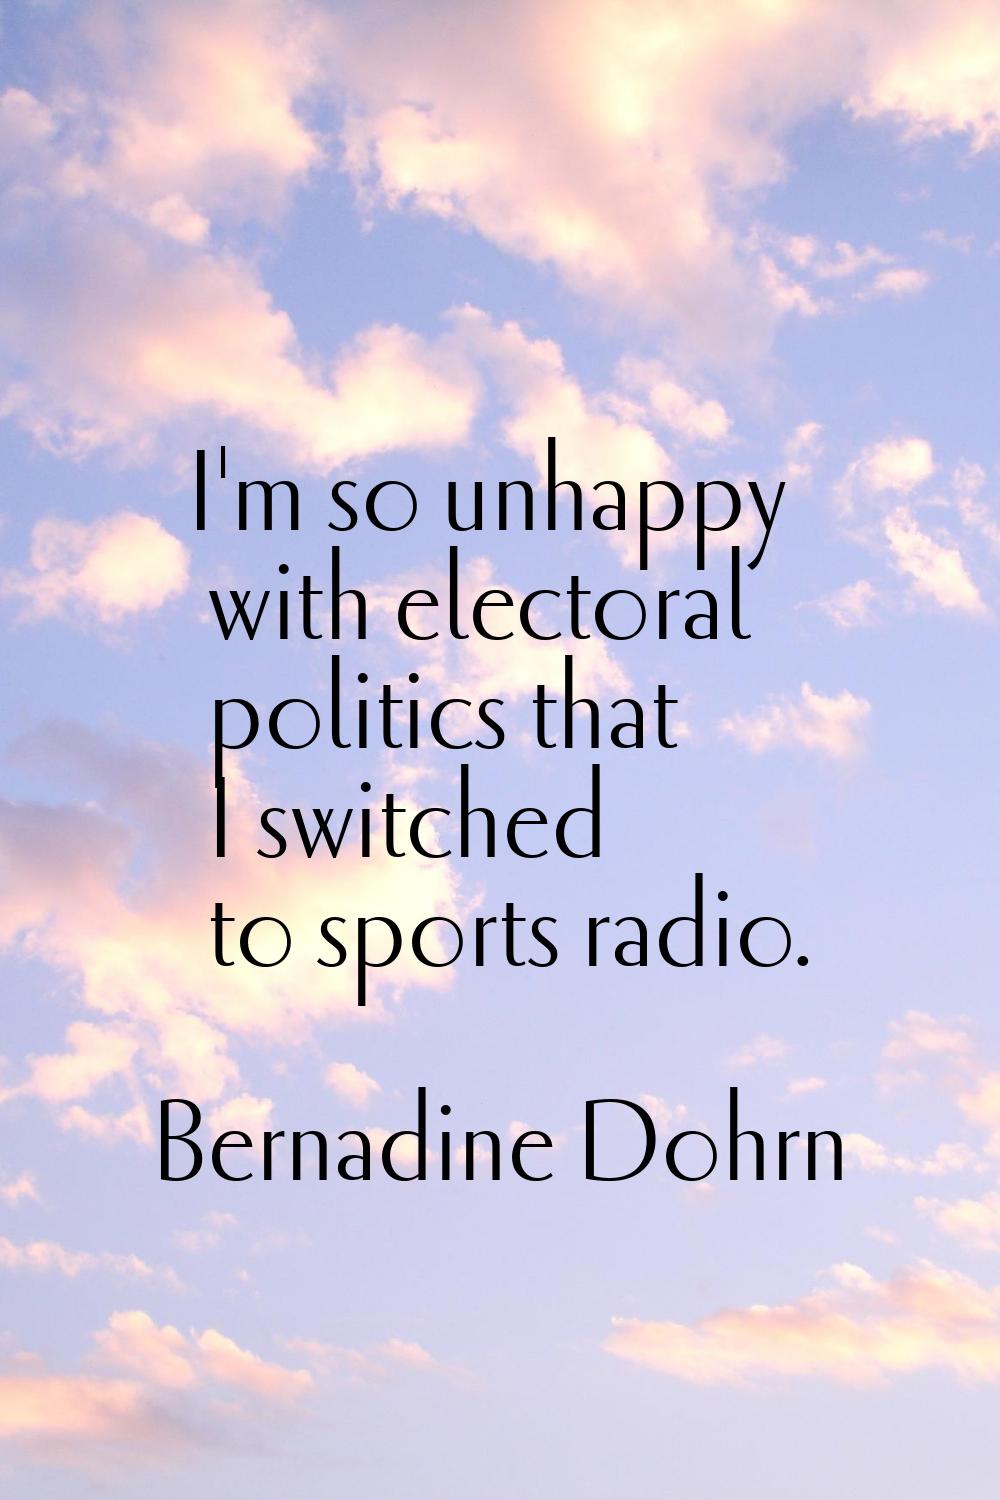 I'm so unhappy with electoral politics that I switched to sports radio.